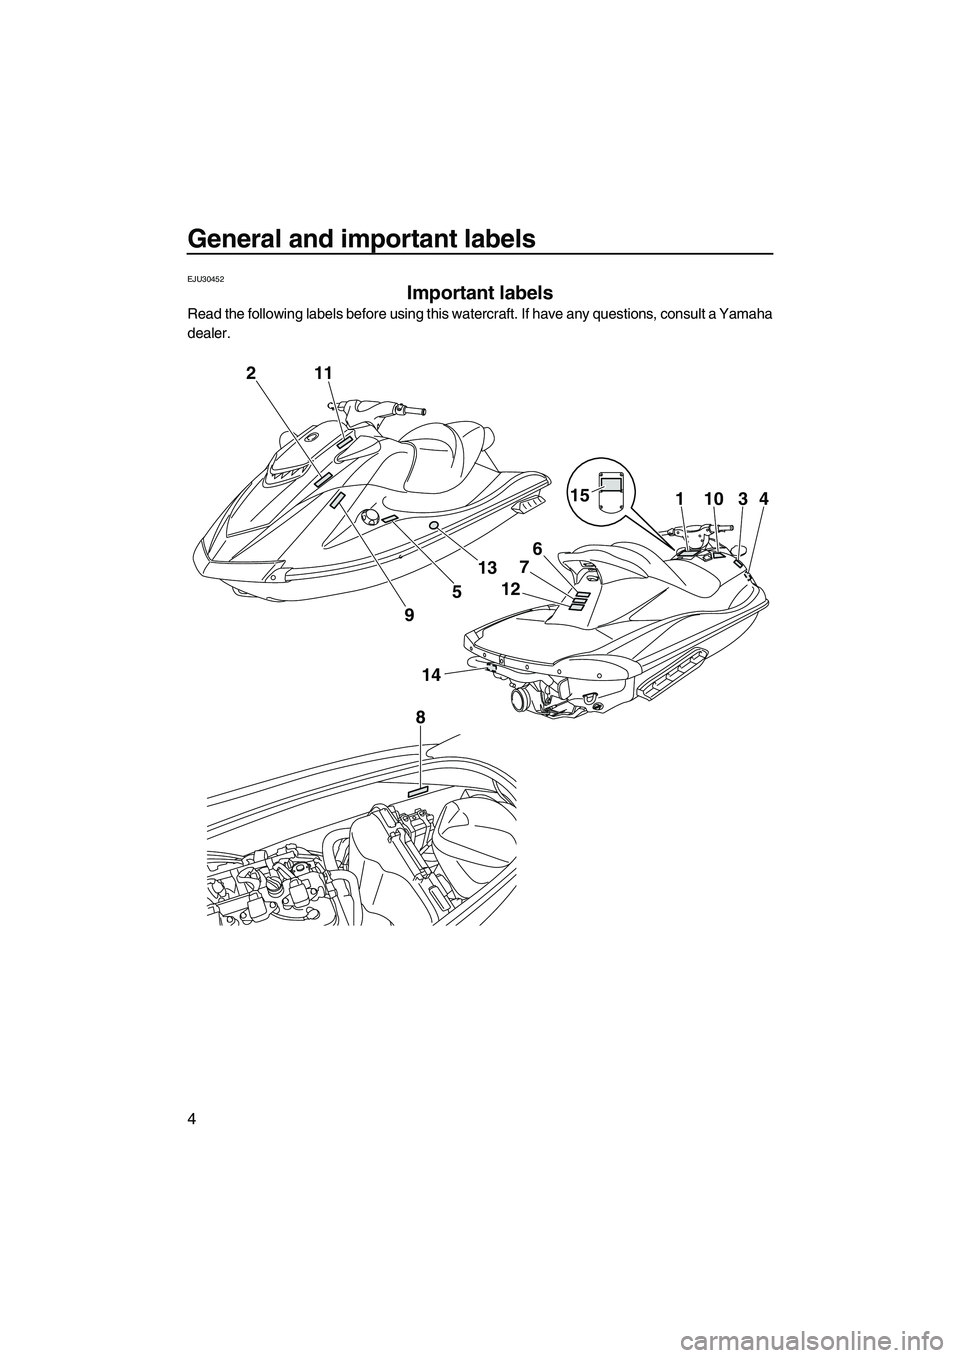 YAMAHA VXR 2013  Owners Manual General and important labels
4
EJU30452
Important labels 
Read the following labels before using this watercraft. If have any questions, consult a Yamaha
dealer.
2
14
8
15
6
7
12
11034
11
9
5
13
UF2M7